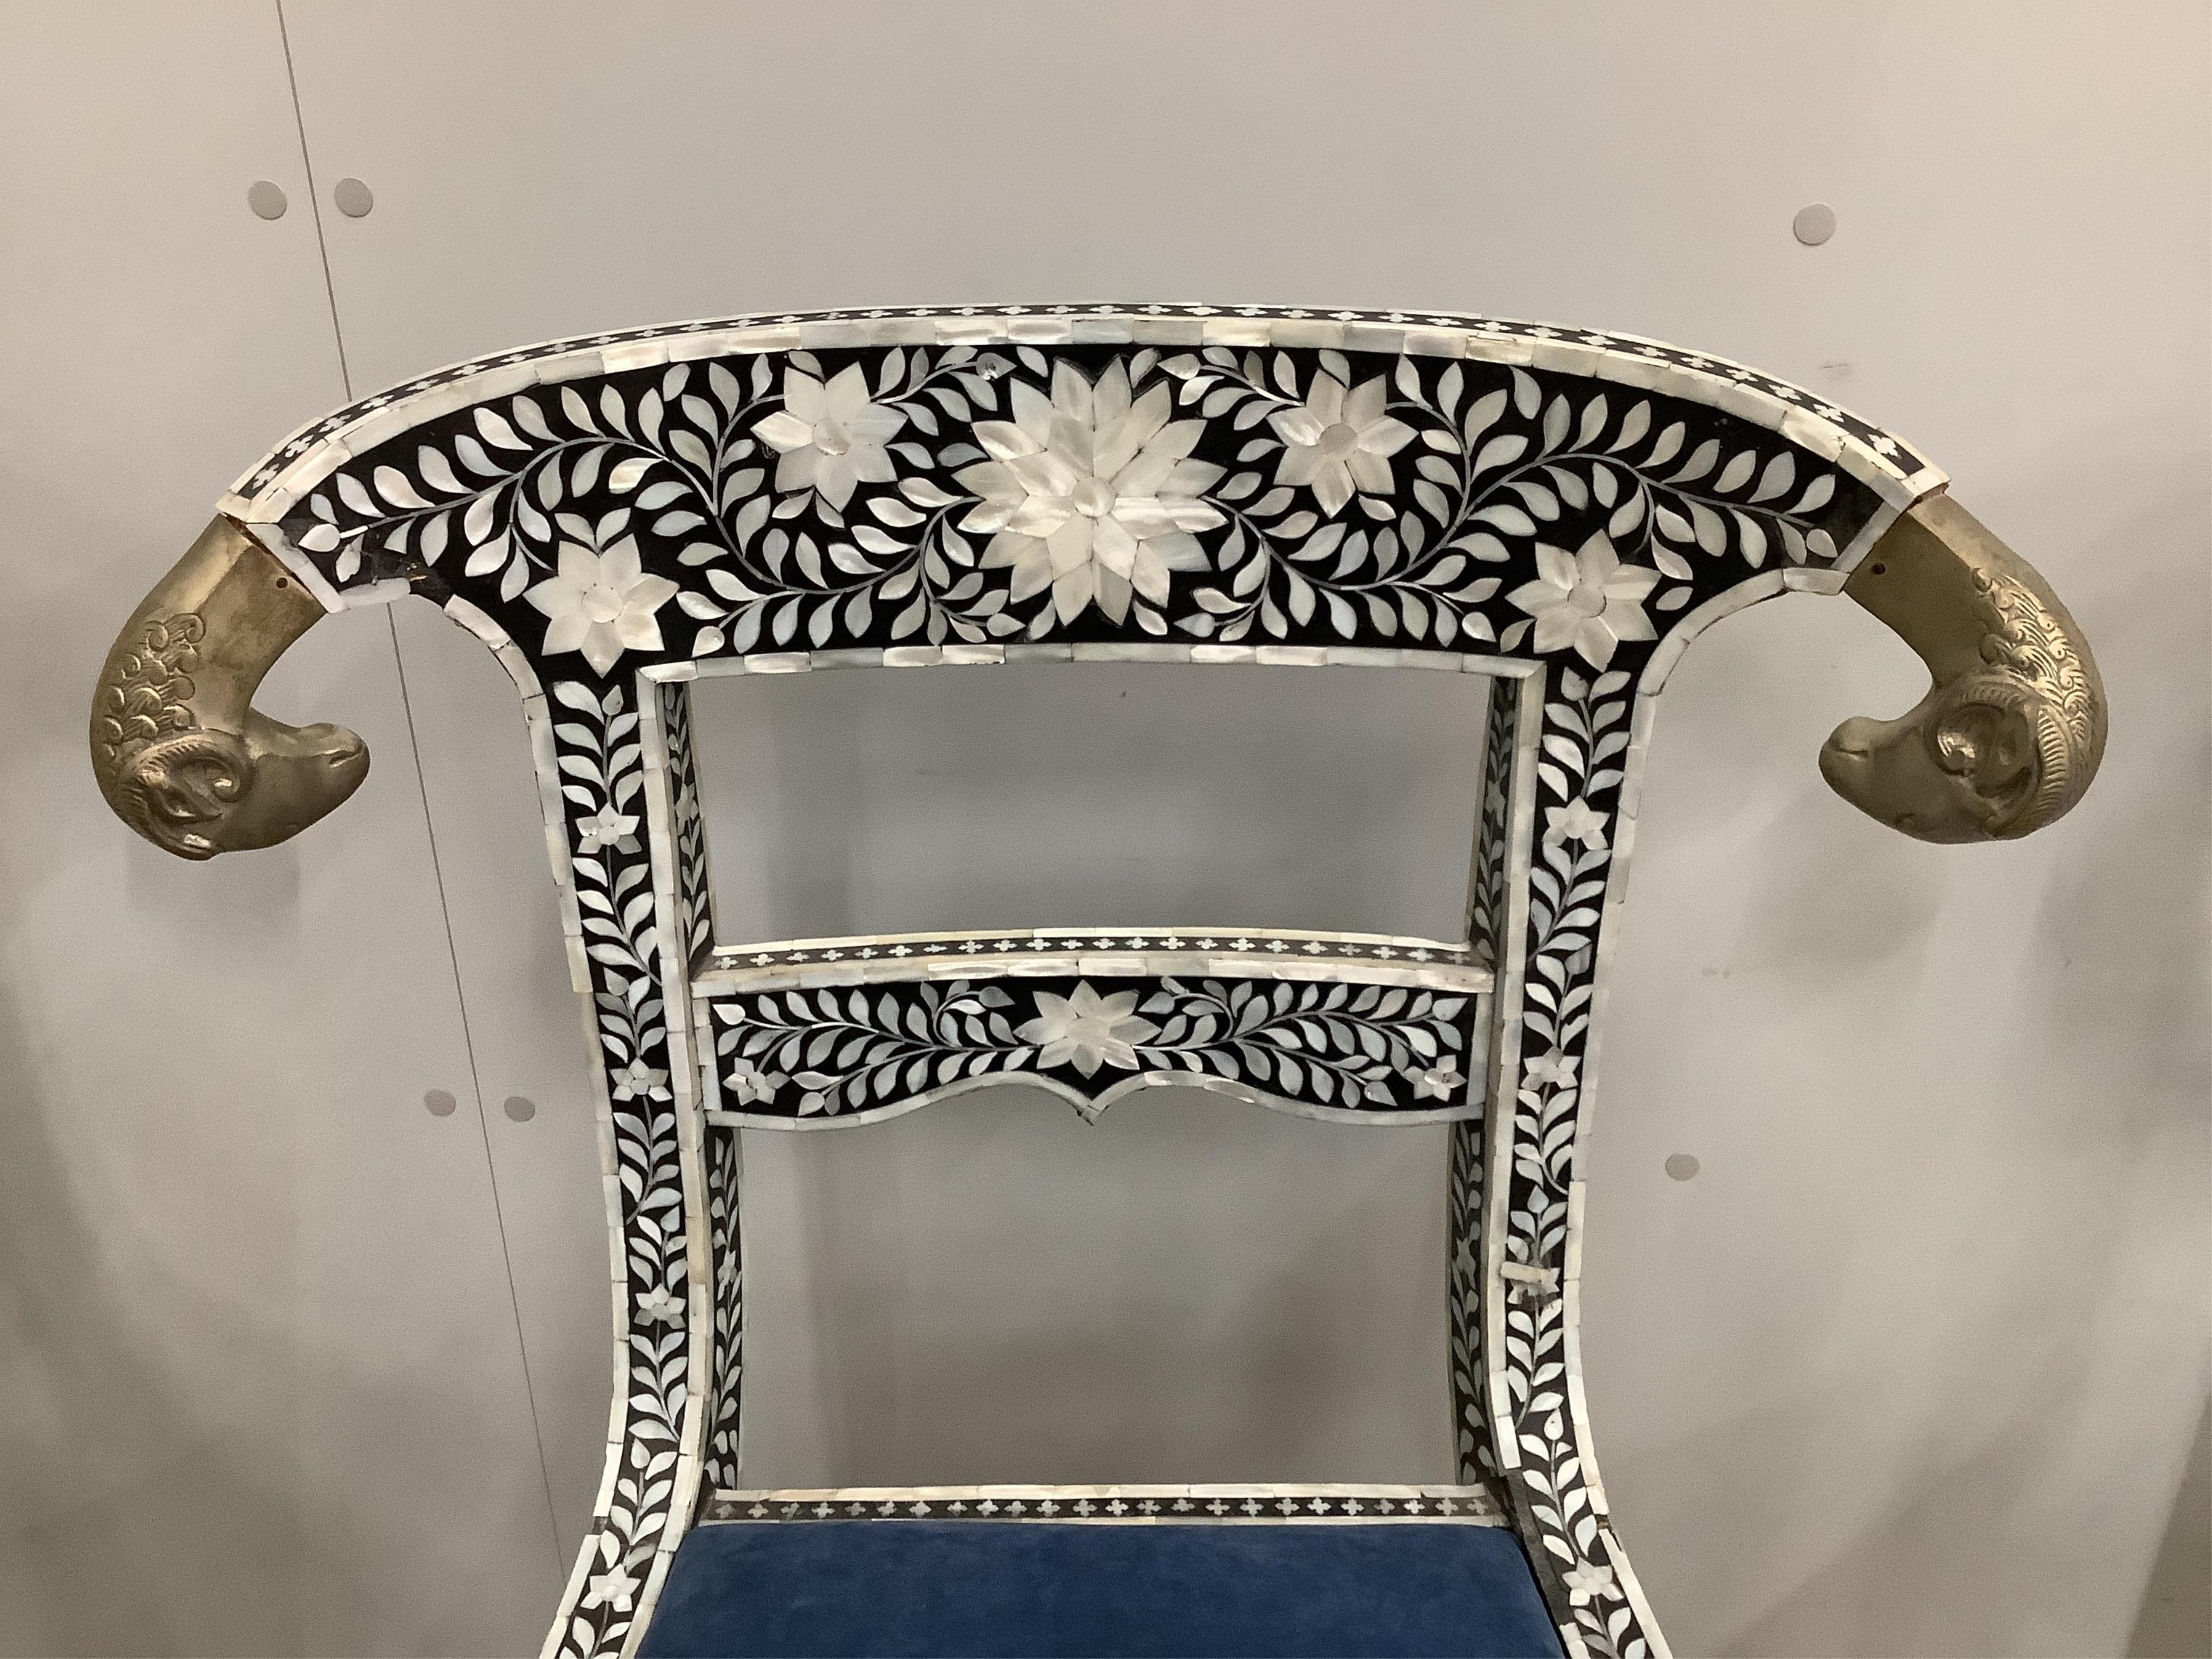 Two pairs of Indian bone, or mother of pearl, overlaid dining chairs, width 62cm, depth 44cm, height 90cm. Condition - good